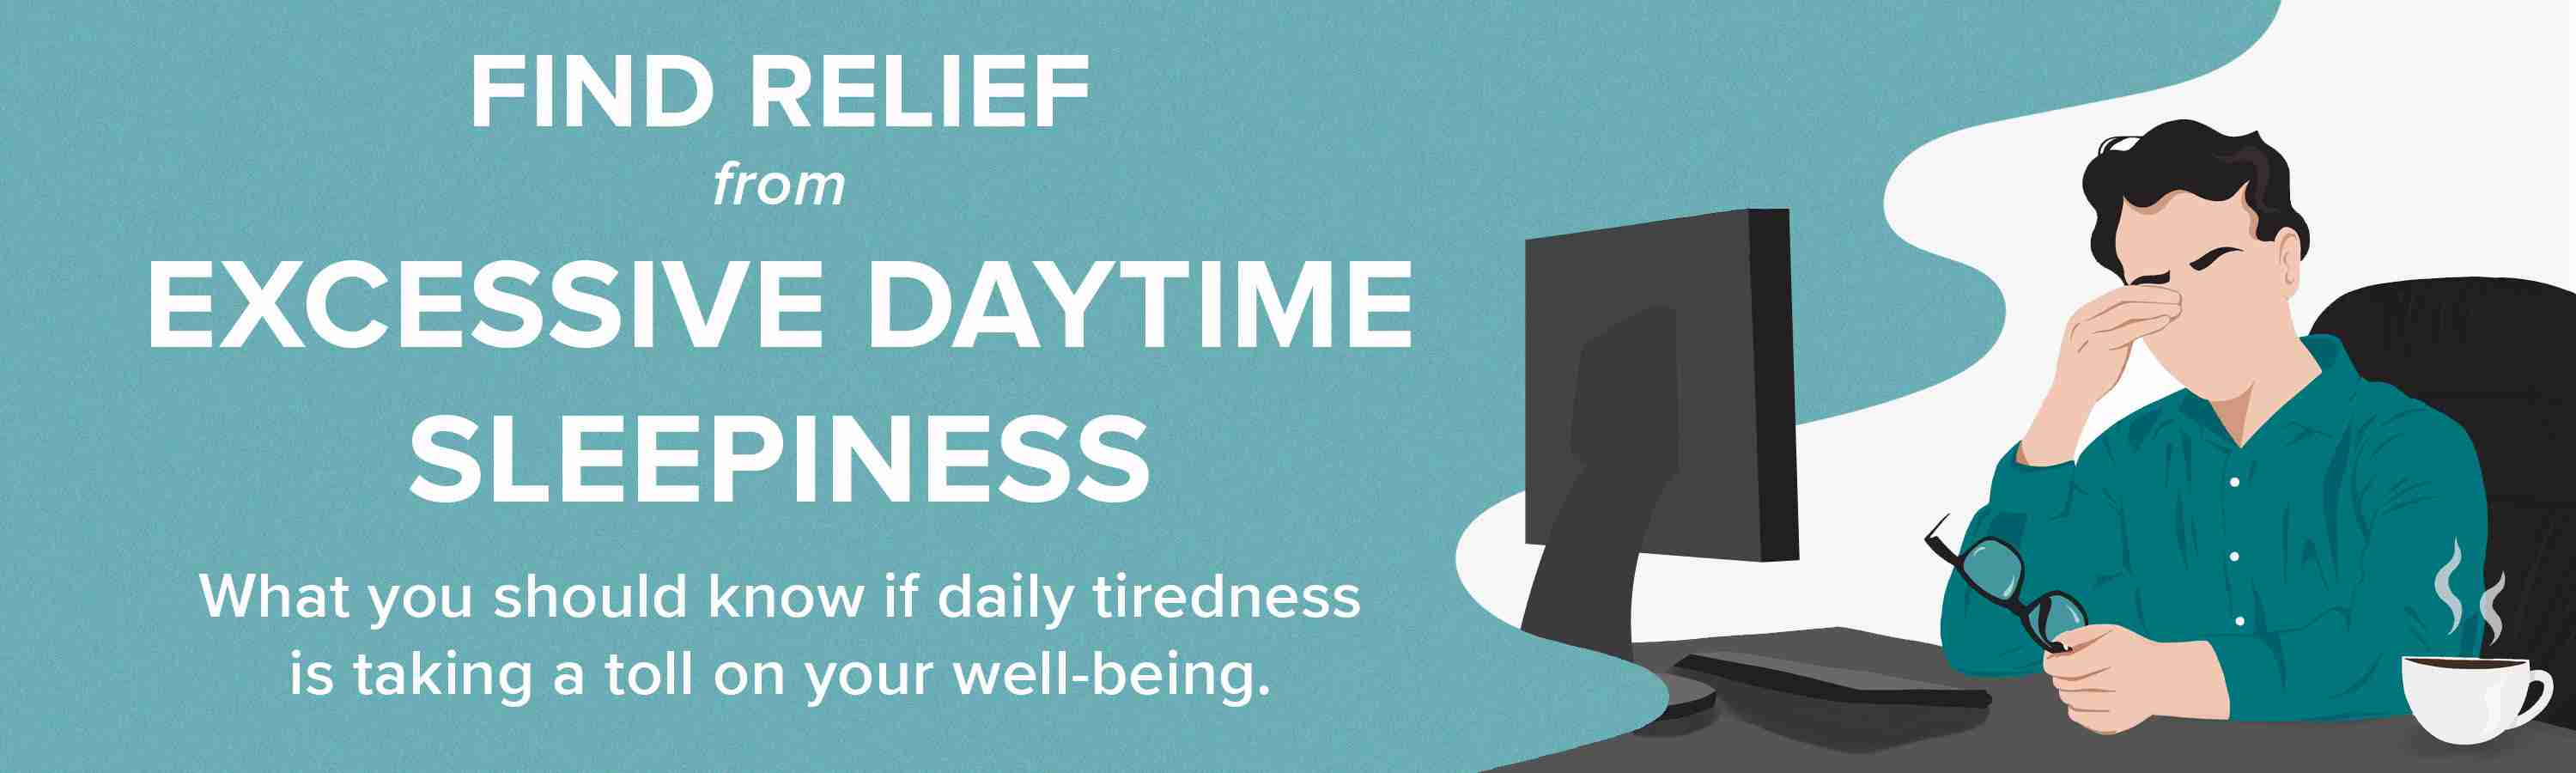 Find Relief from Excessive Daytime Sleepiness